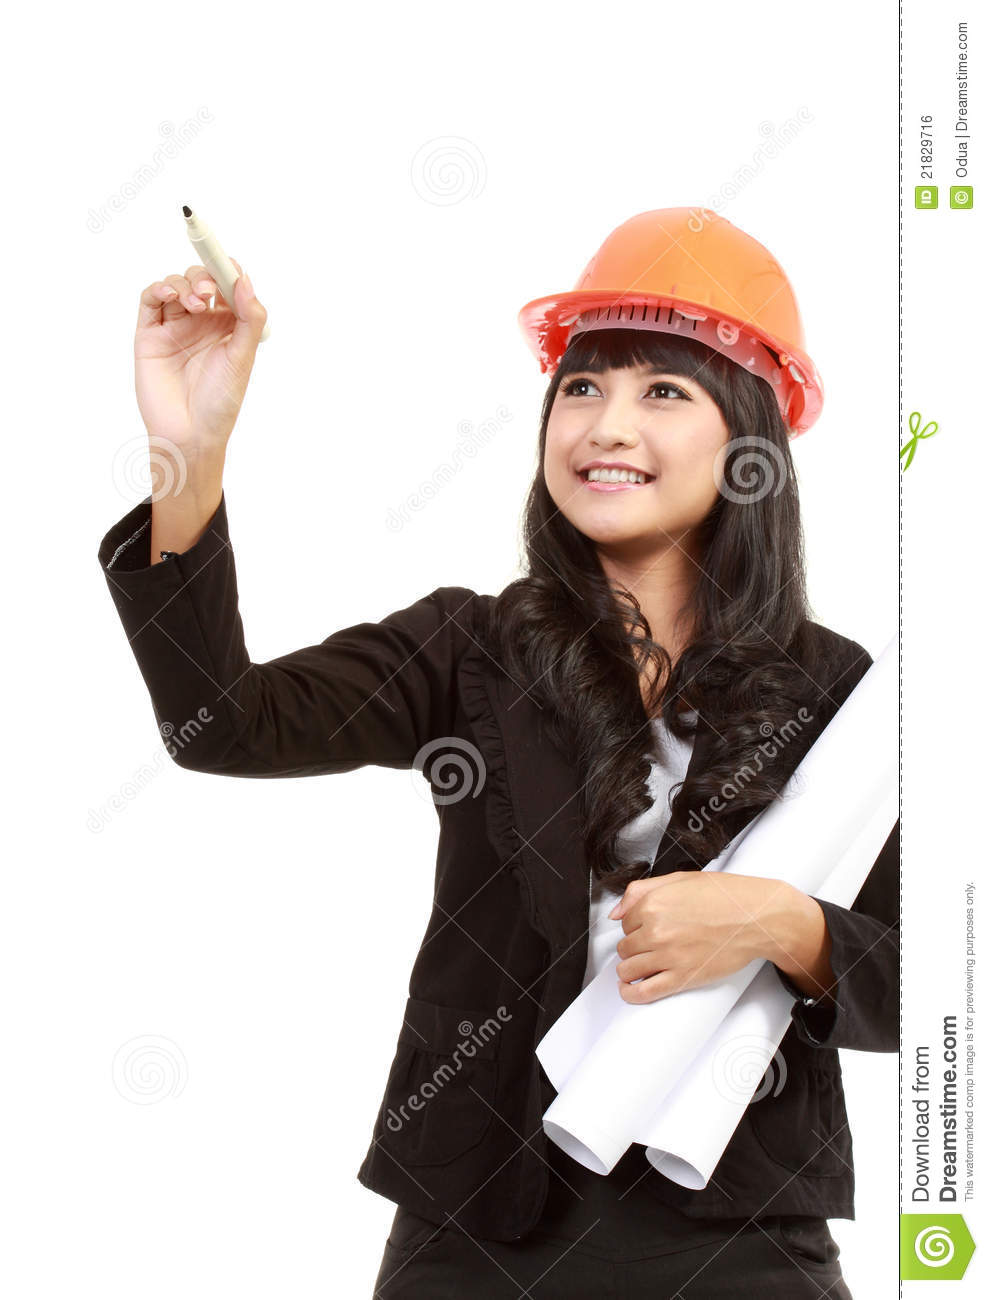 Female Engineer With A Pen Writing Royalty Free Stock Image   Image